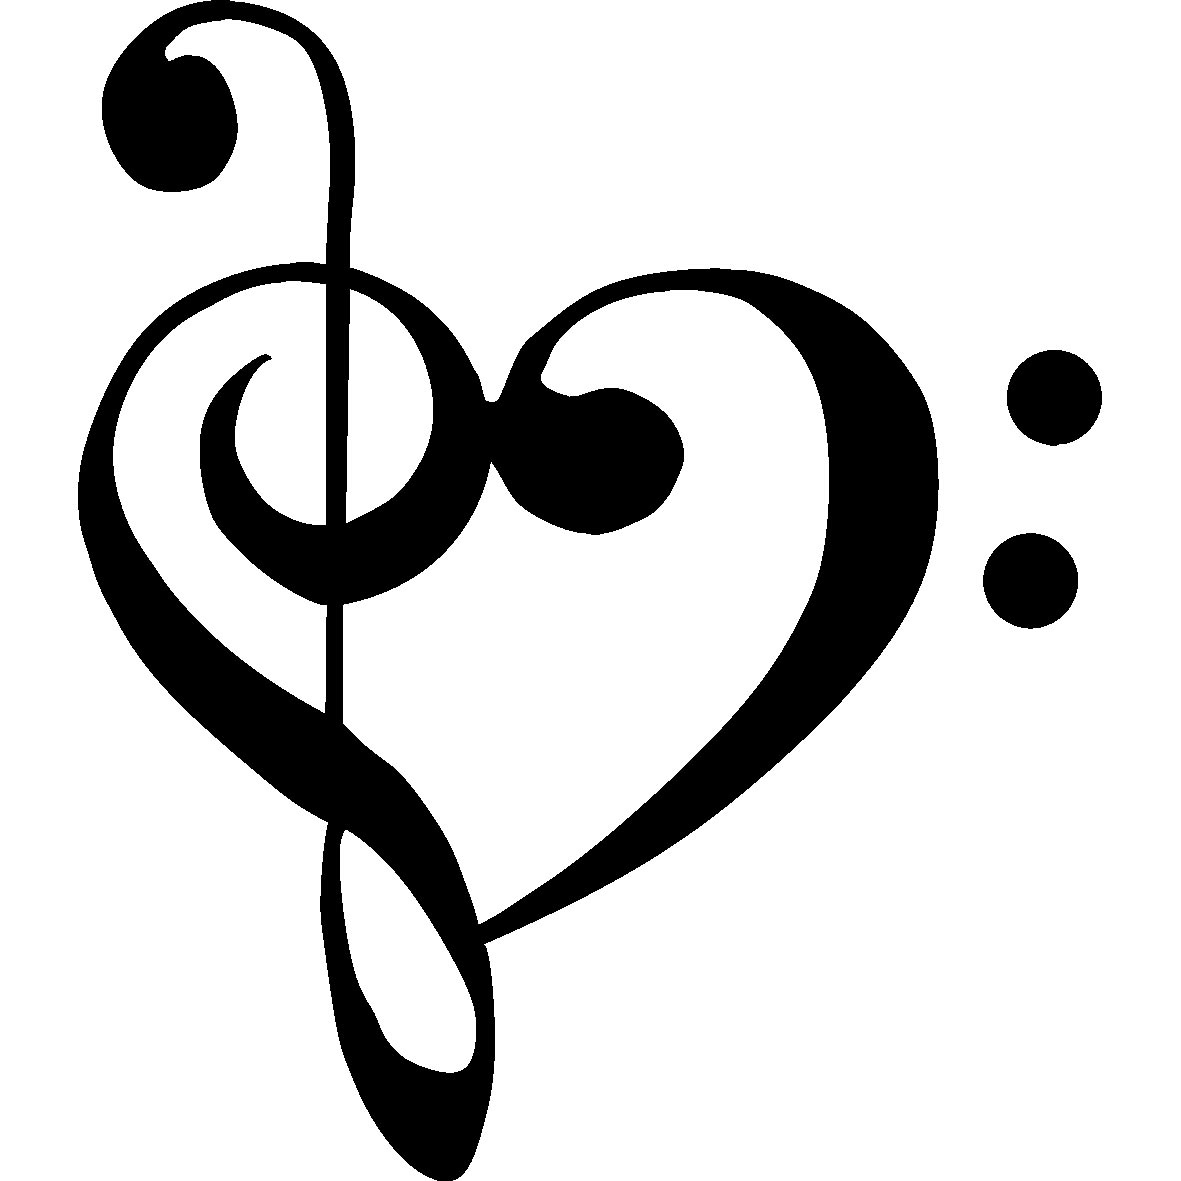 Bass Clef Treble Clef Heart   Free Images At Clker Com   Vector Clip